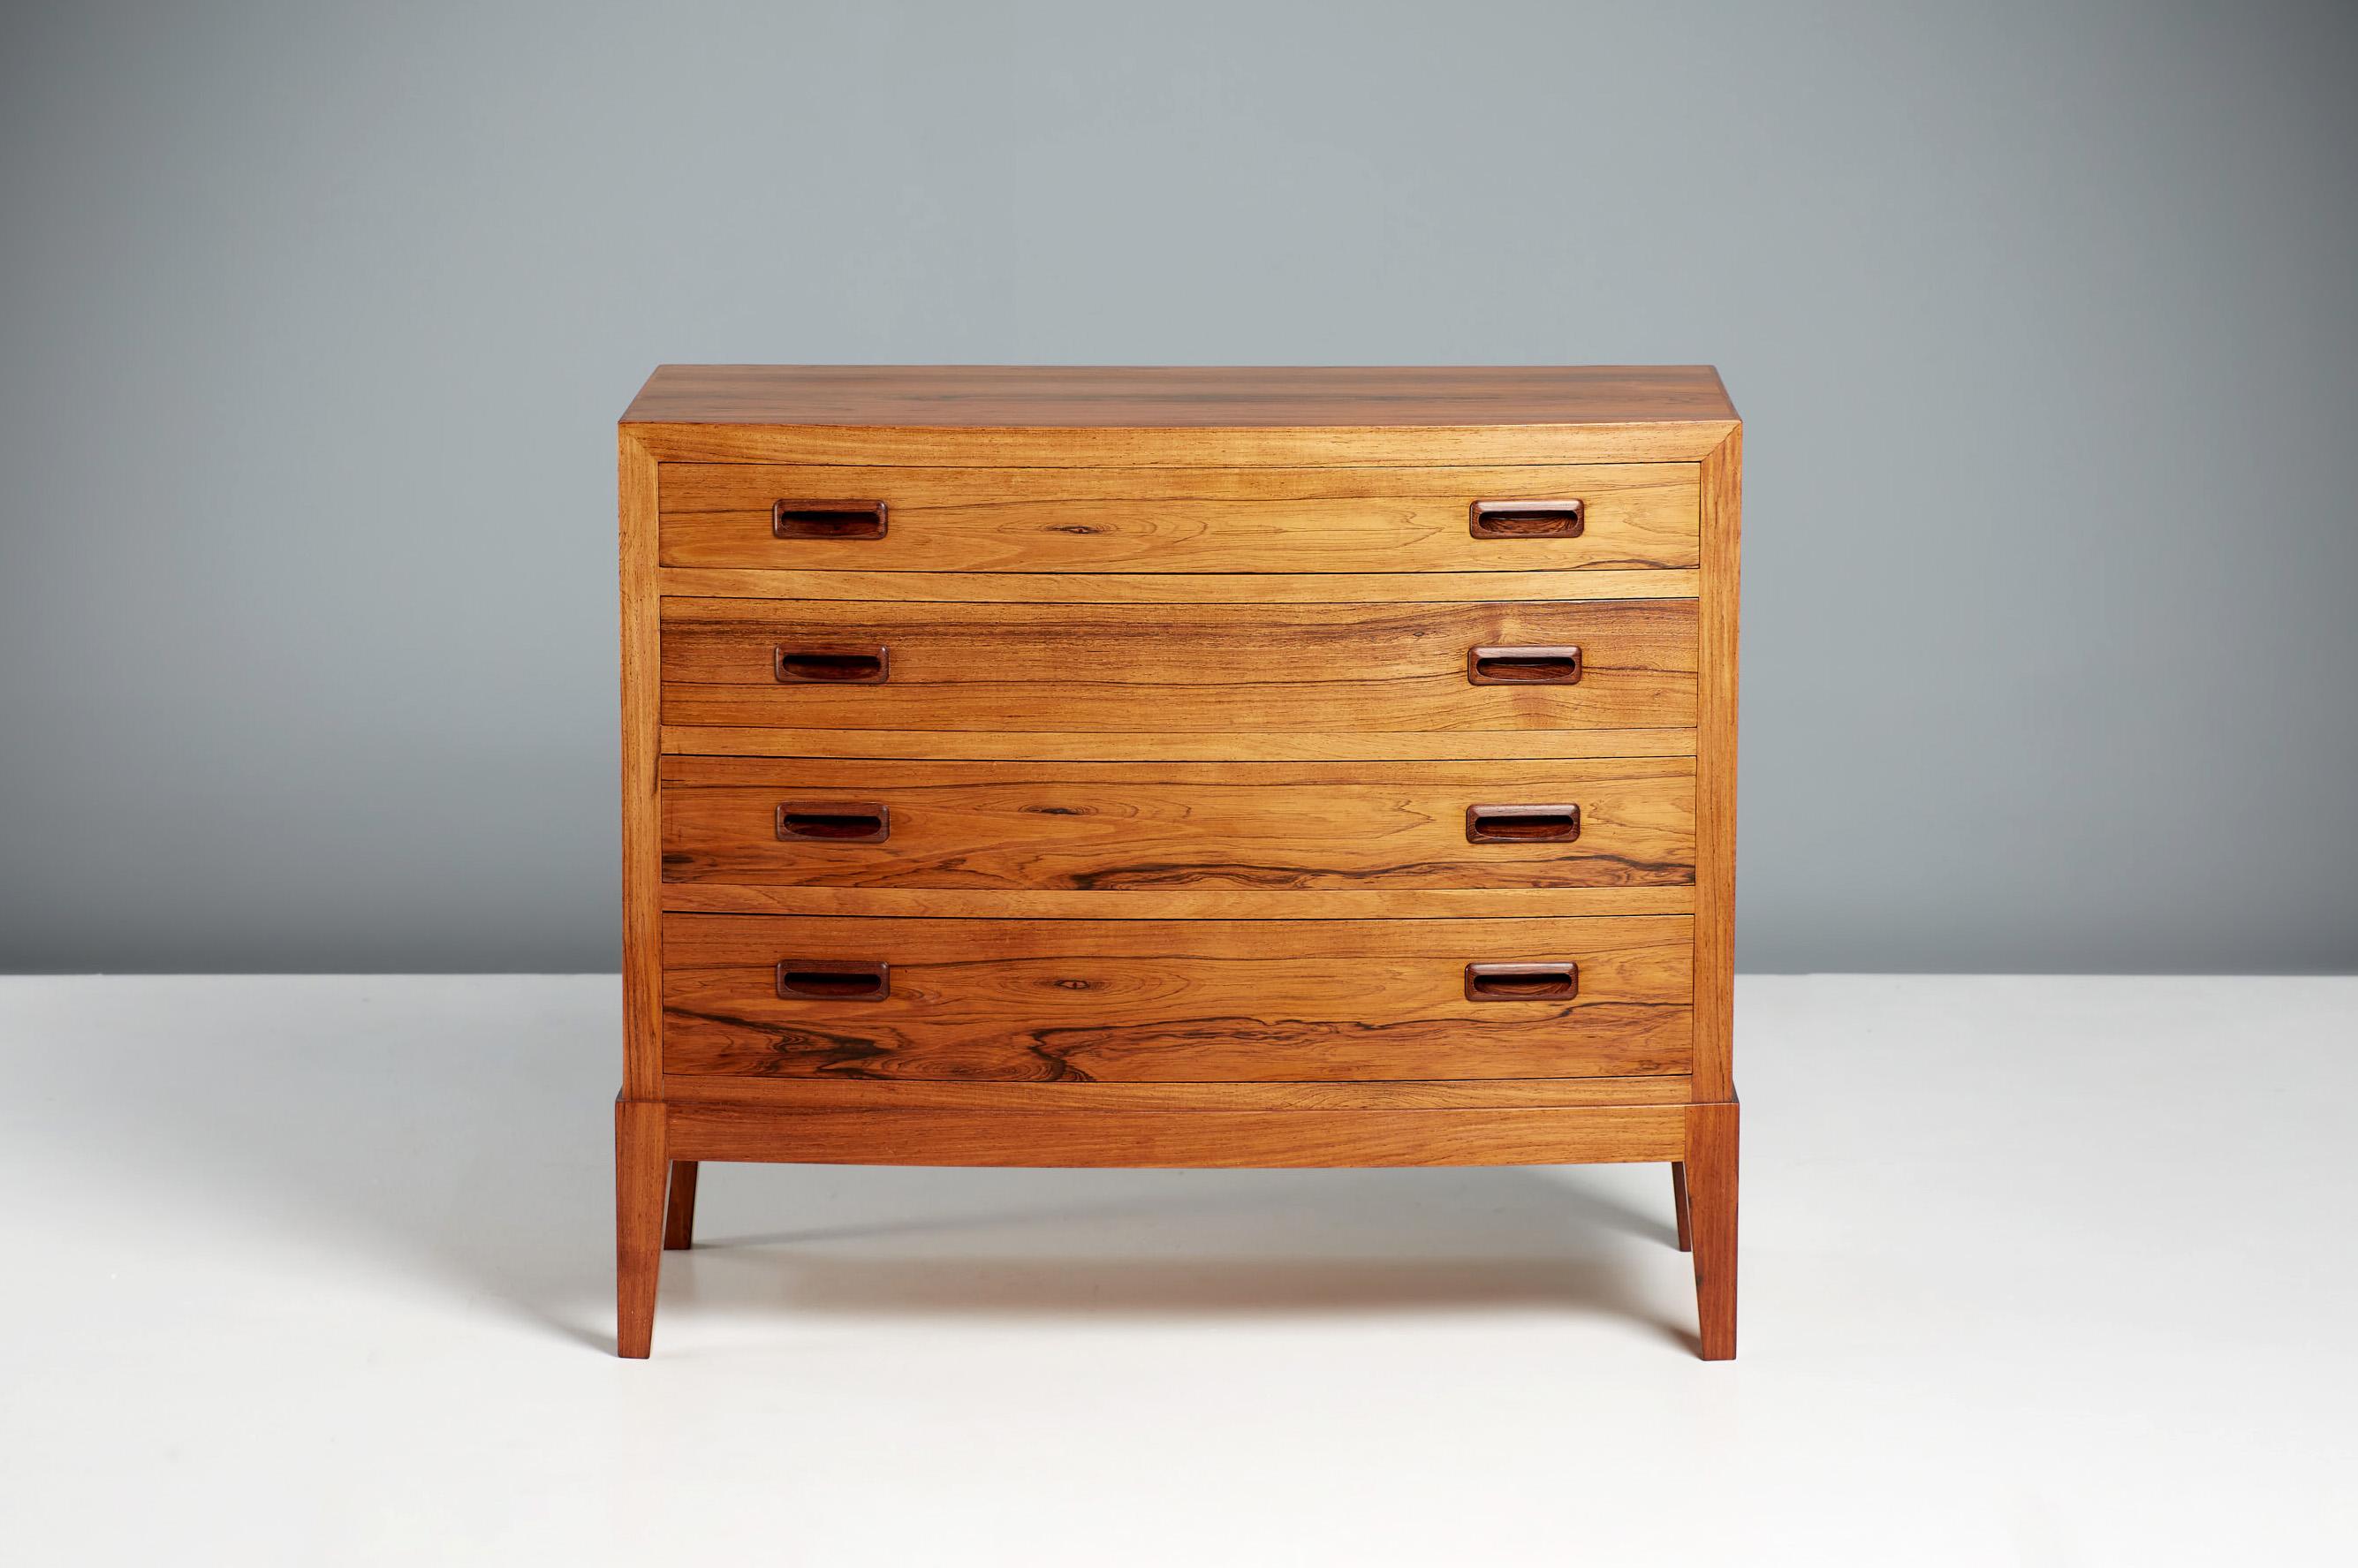 Kai Winding Chest of Drawers, circa 1960s

A low dresser from Danish cabinetmaker Kai Winding in light rosewood with exquisite grain. The frame and drawer pulls are made from solid rosewood.